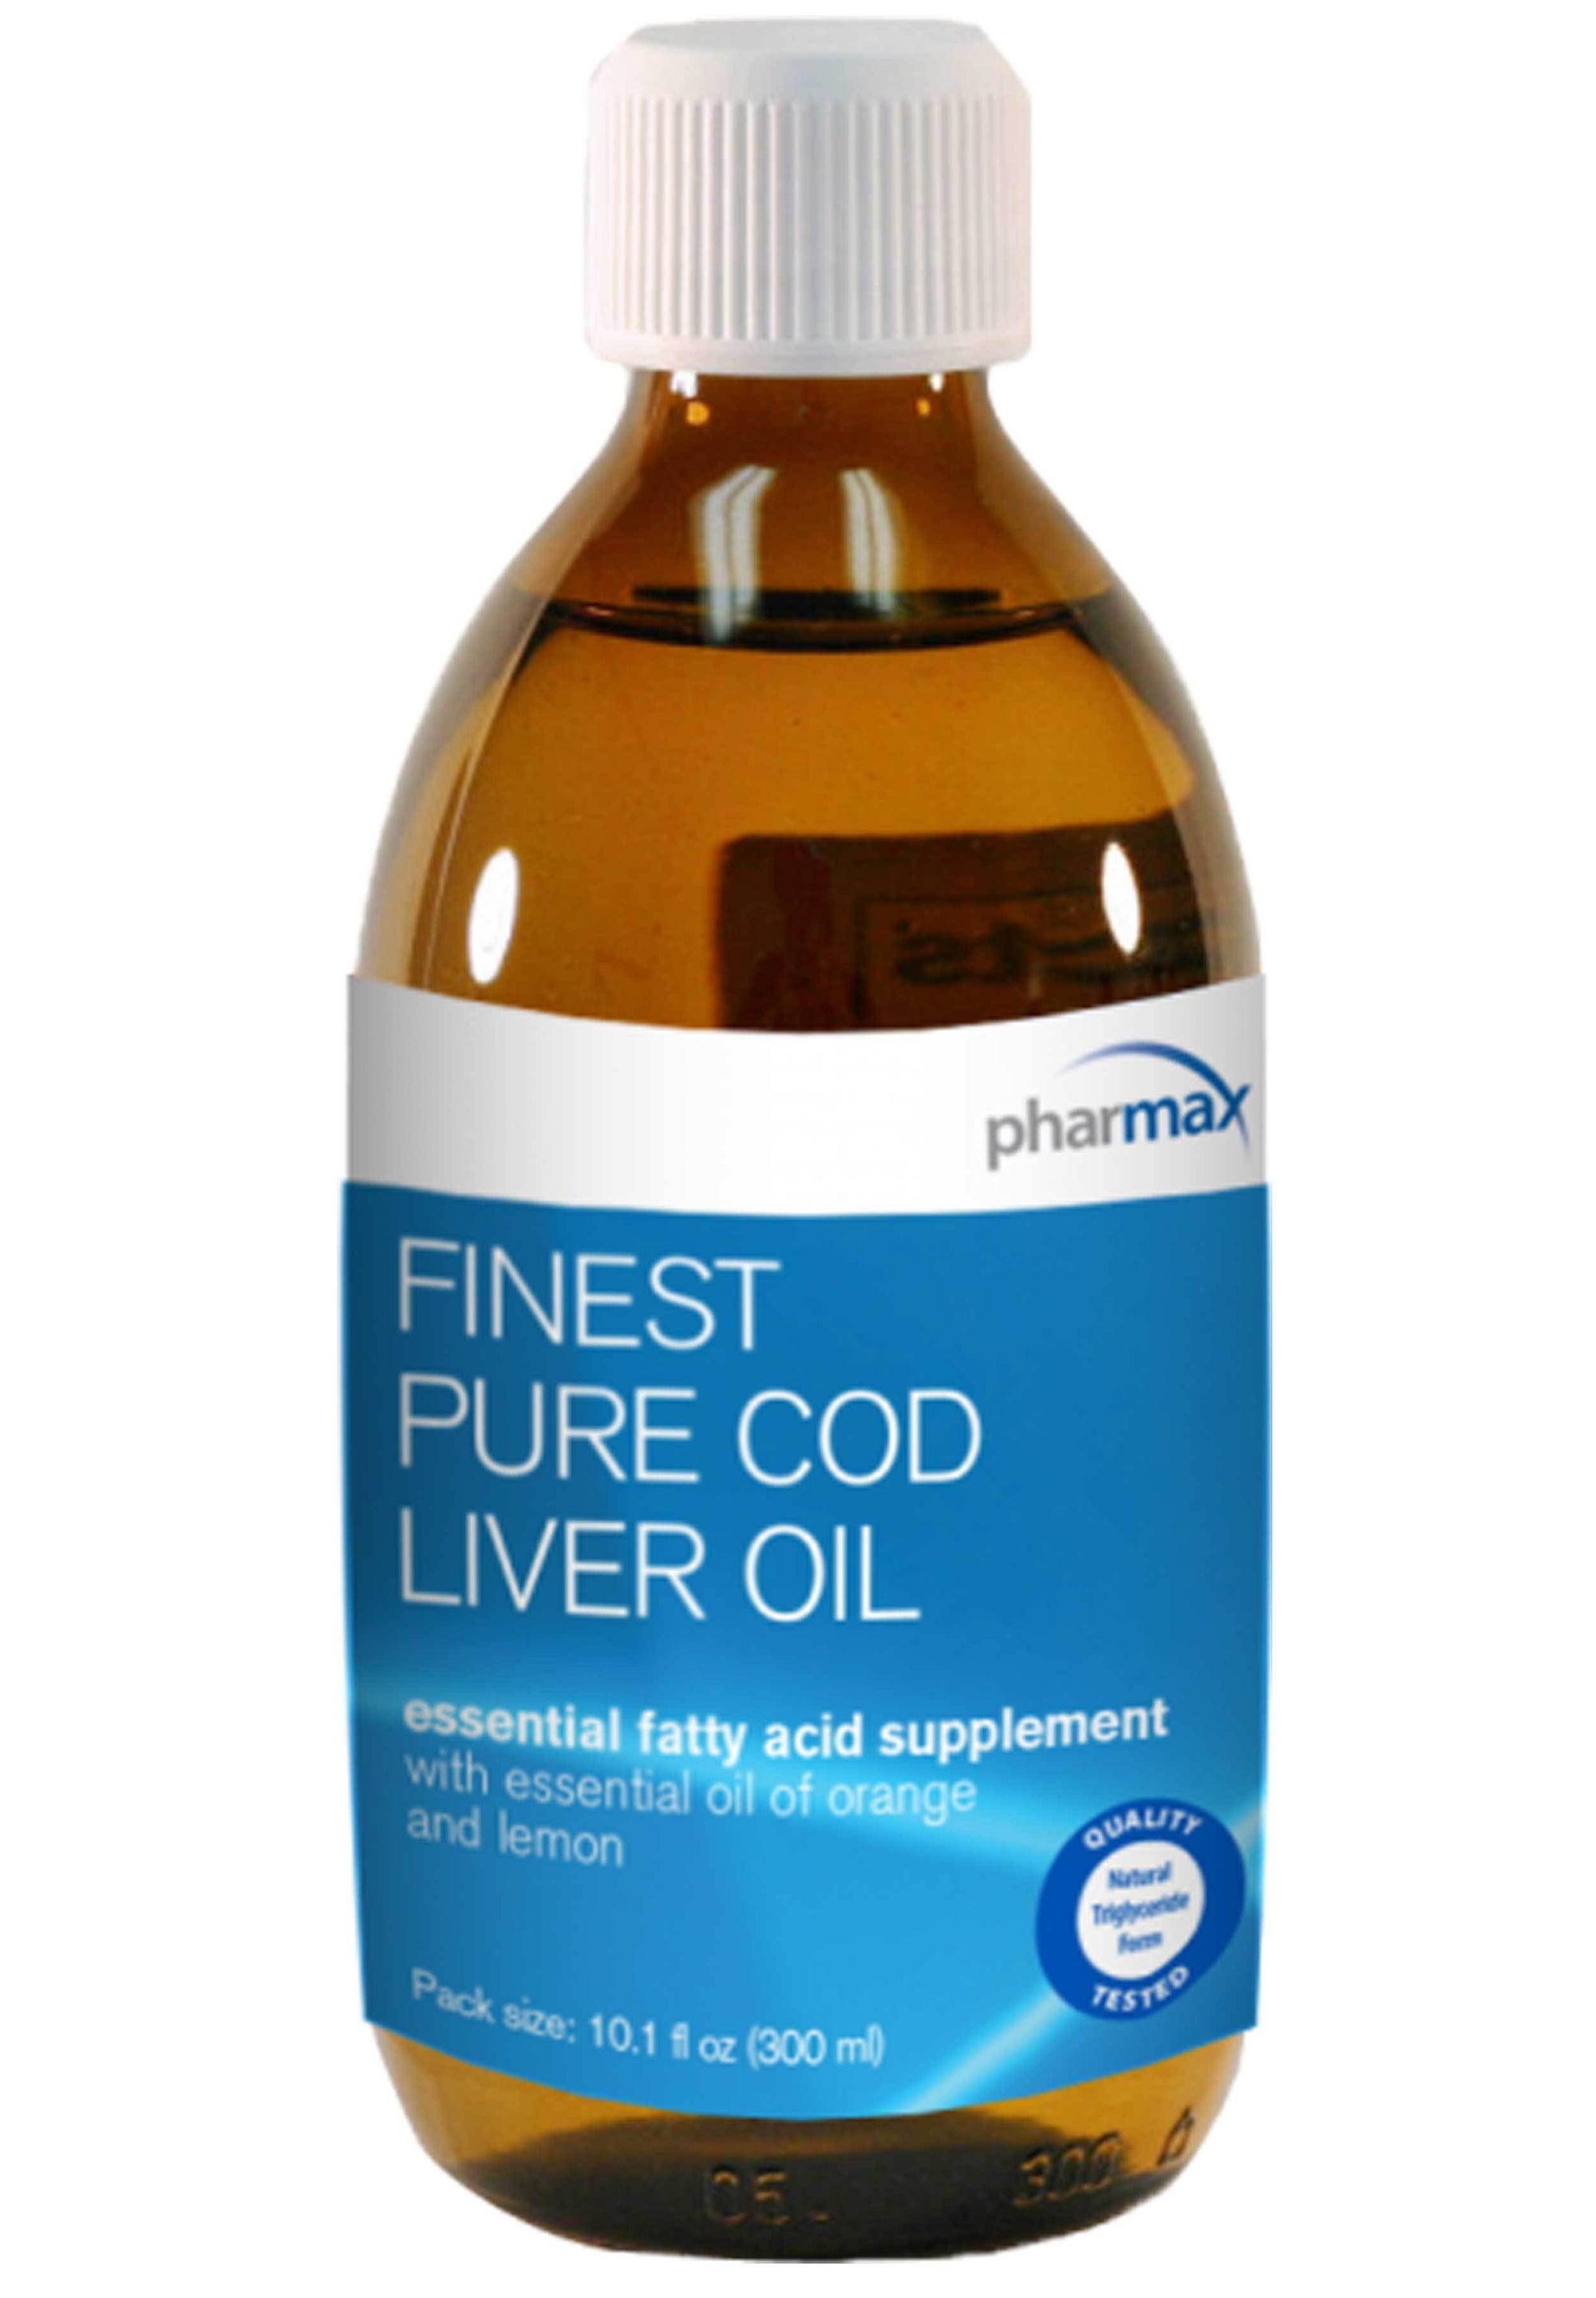 Pharmax Finest Pure Cod Liver Oil Supplement First